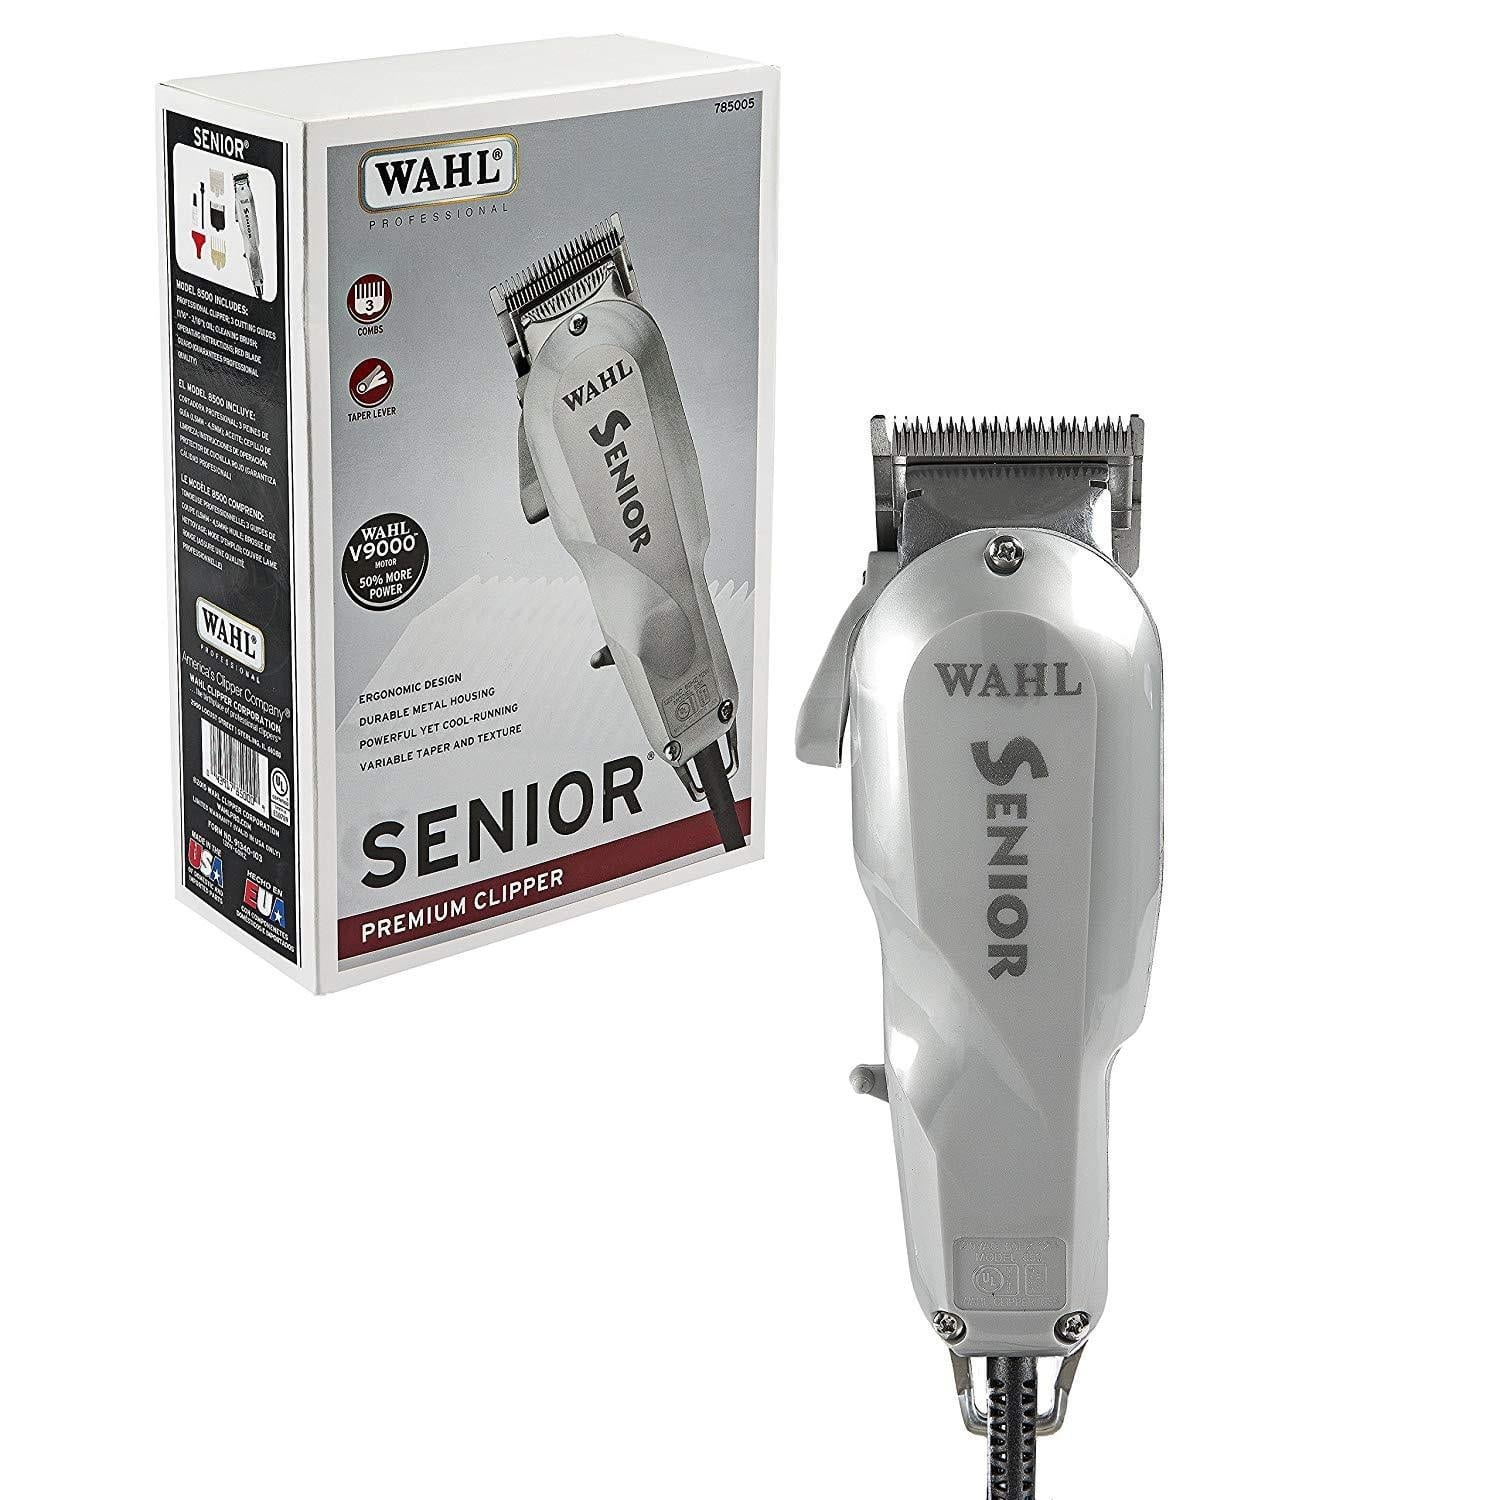 Wahl, Wahl Professional Senior Clipper #8500, Mk Beauty Club, Hair Clippers